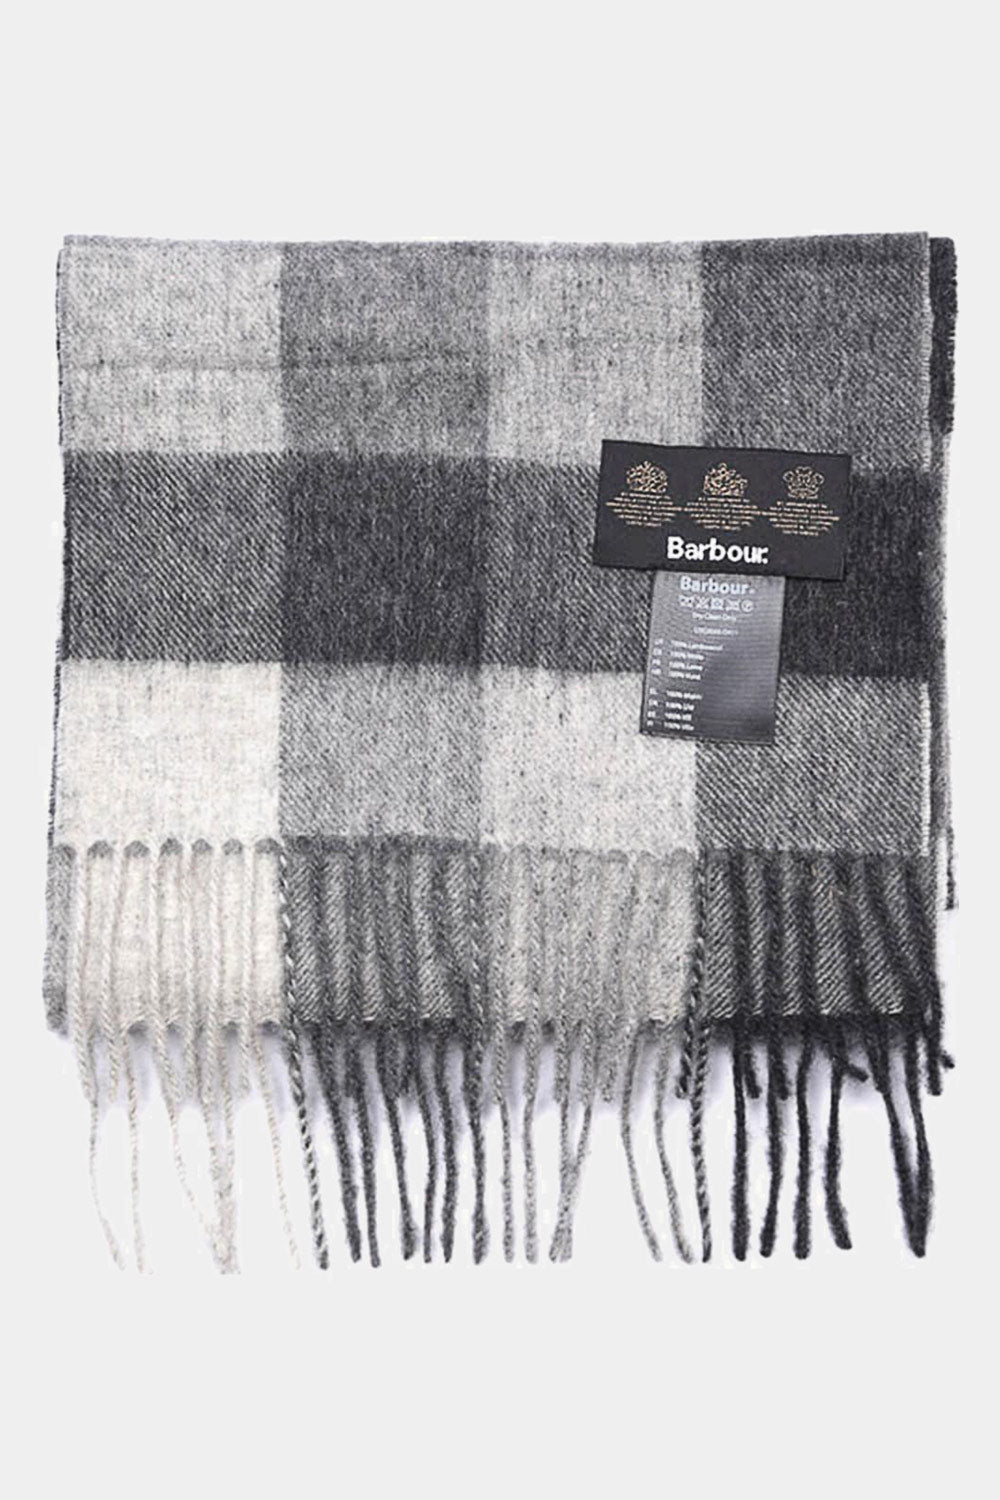 barbour tattersall lambswool scarf